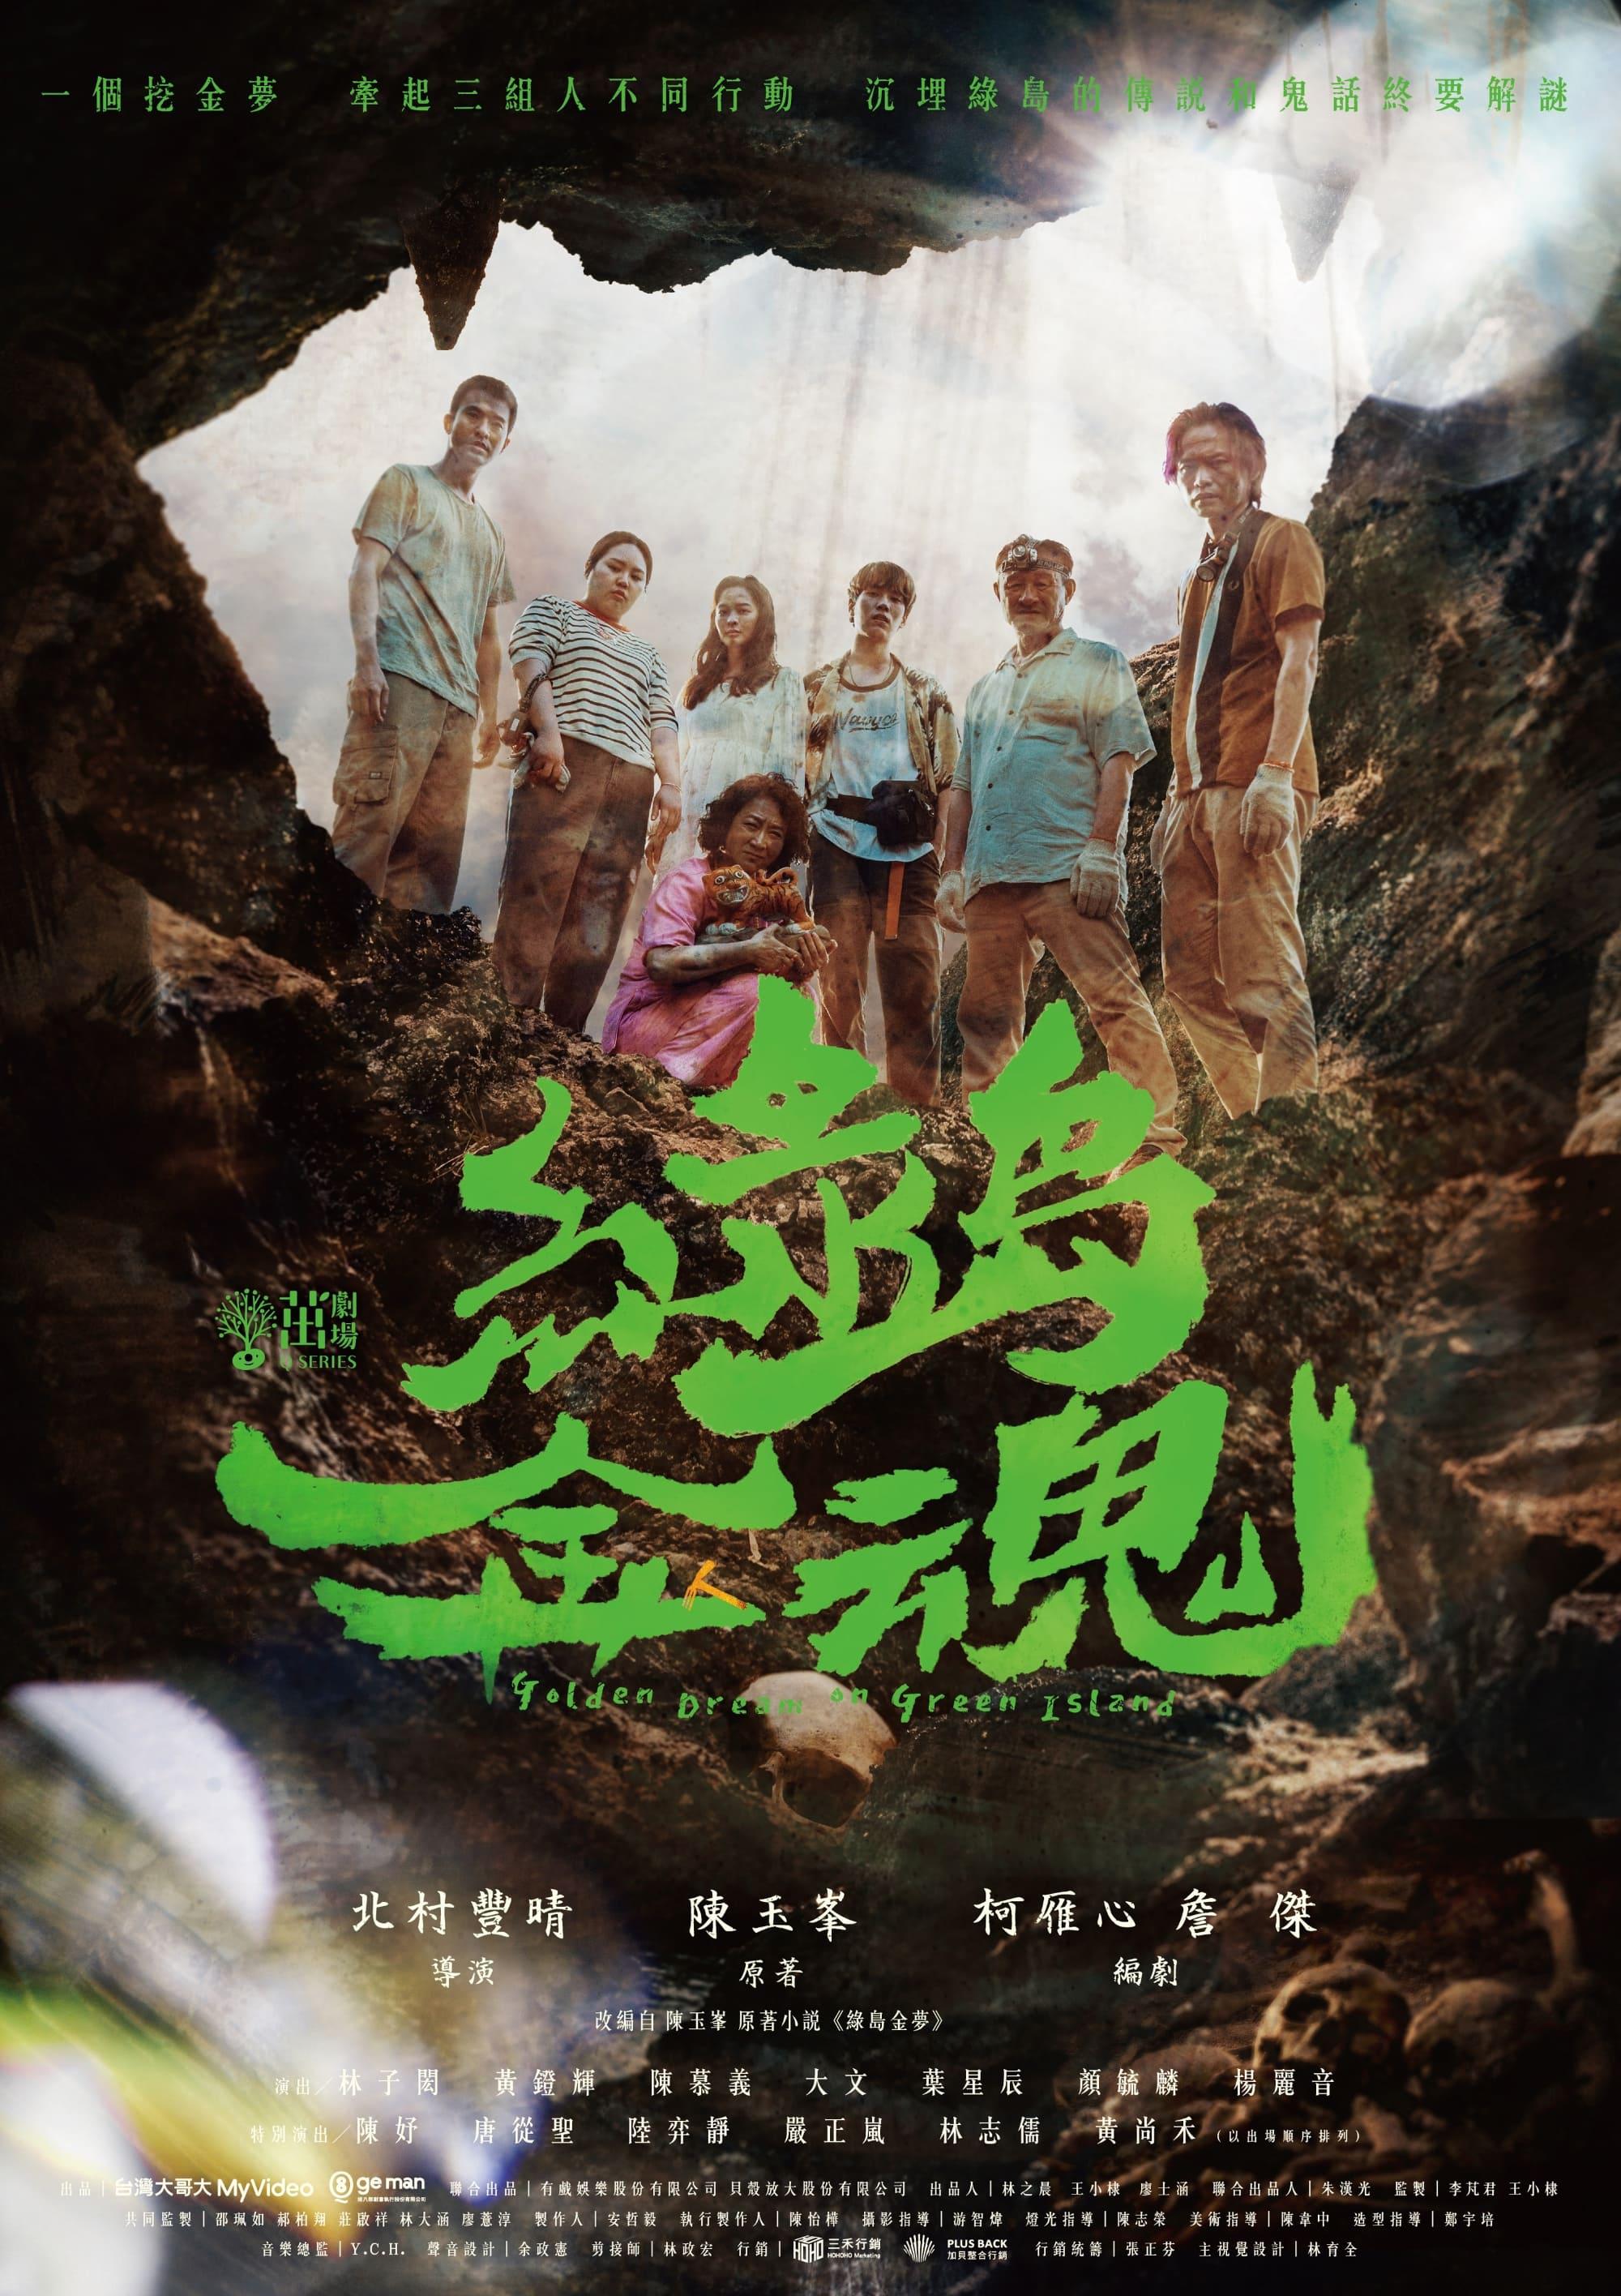 TV ratings for Golden Dream On Green Island (綠島金魂) in los Estados Unidos. PTS TV series